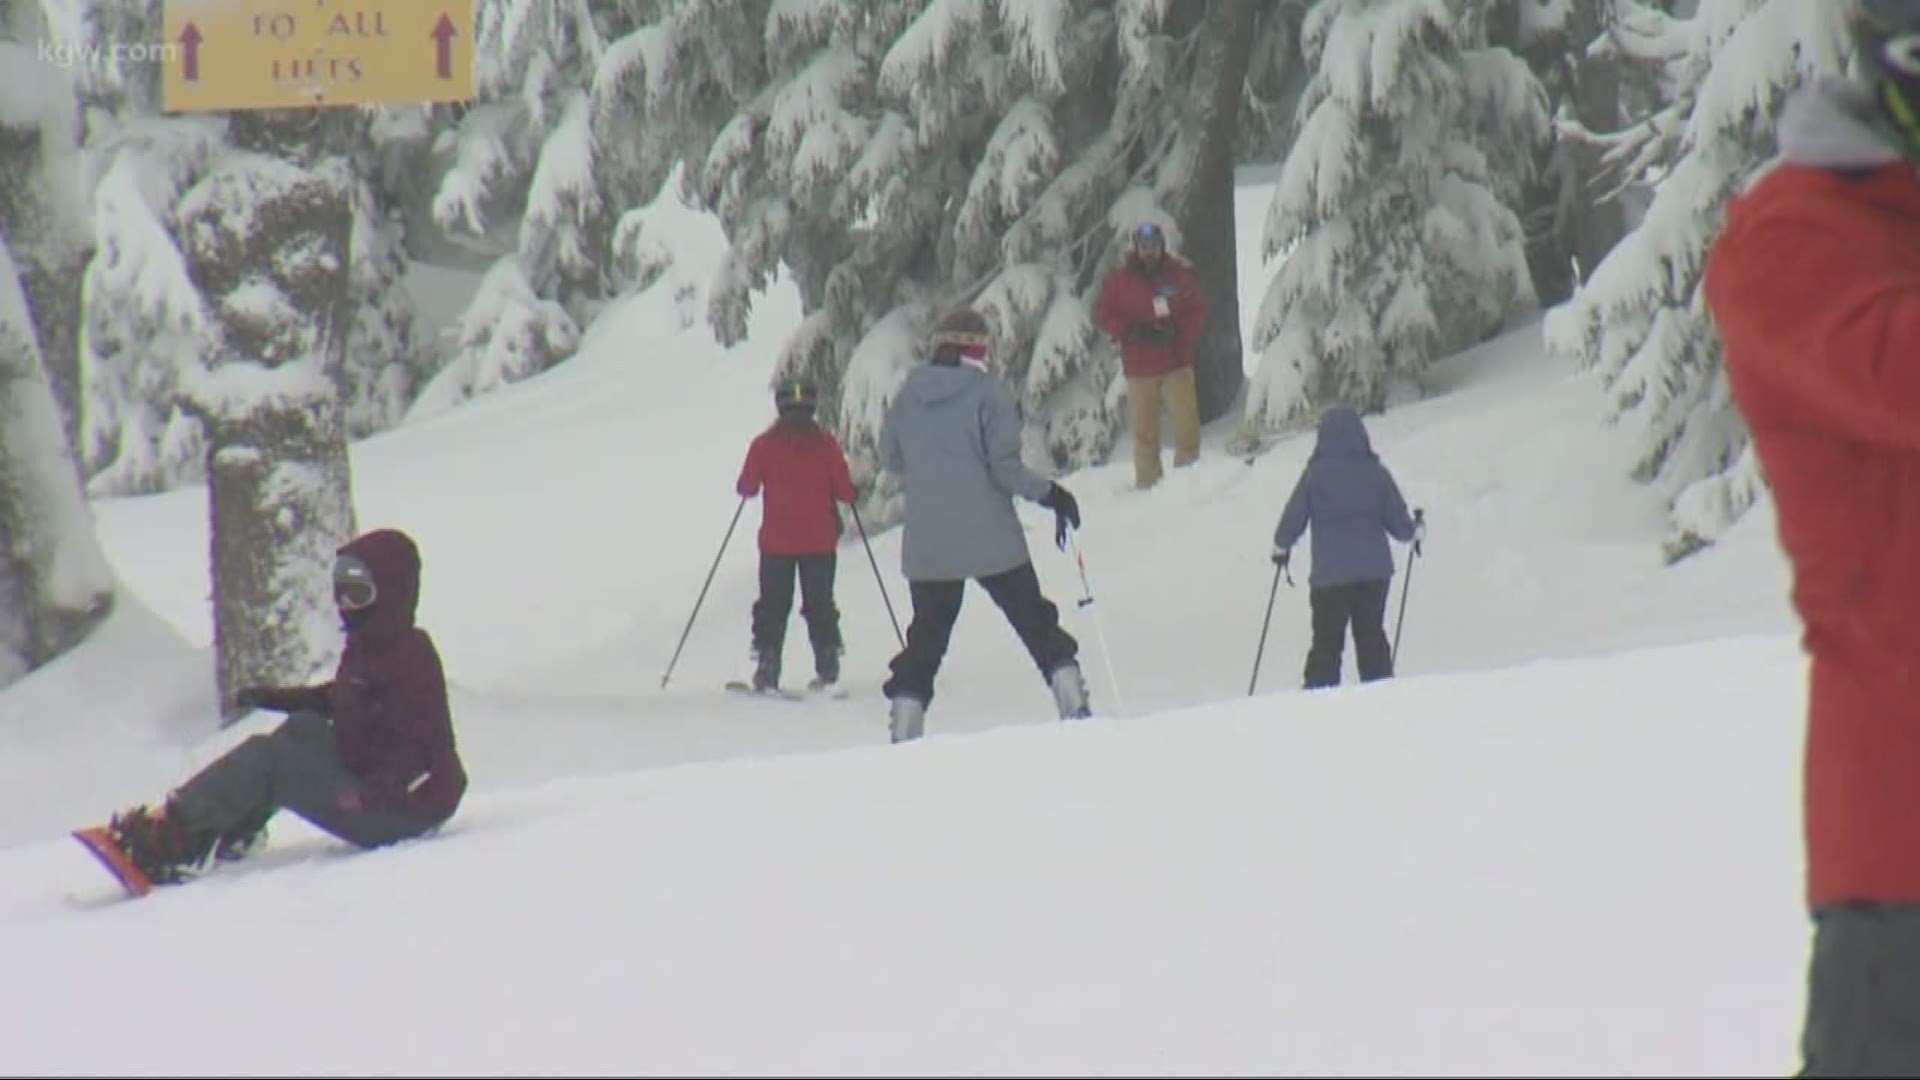 The snow came down today at Mt. Hood and skiers and snowboarders were excited.